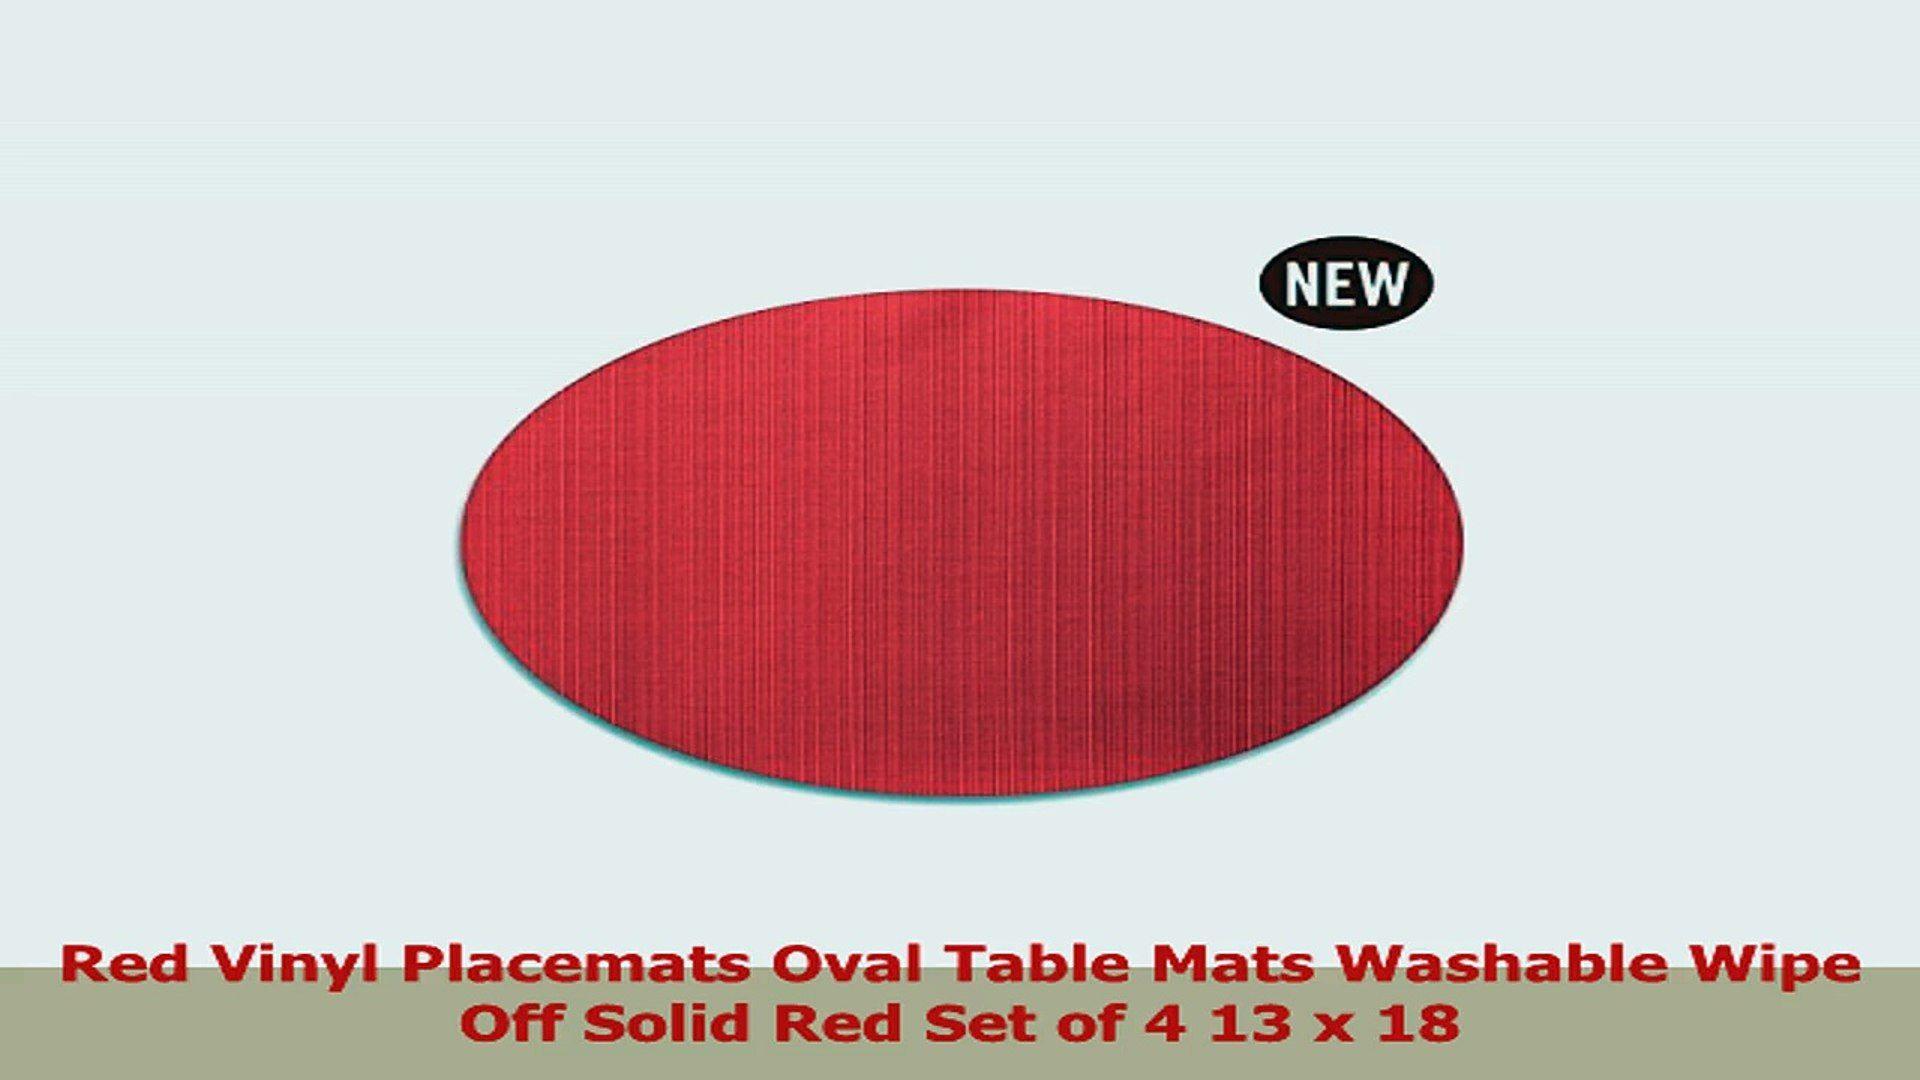 Solid Red Circle Logo - Red Vinyl Placemats Oval Table Mats Washable Wipe Off Solid Red Set ...